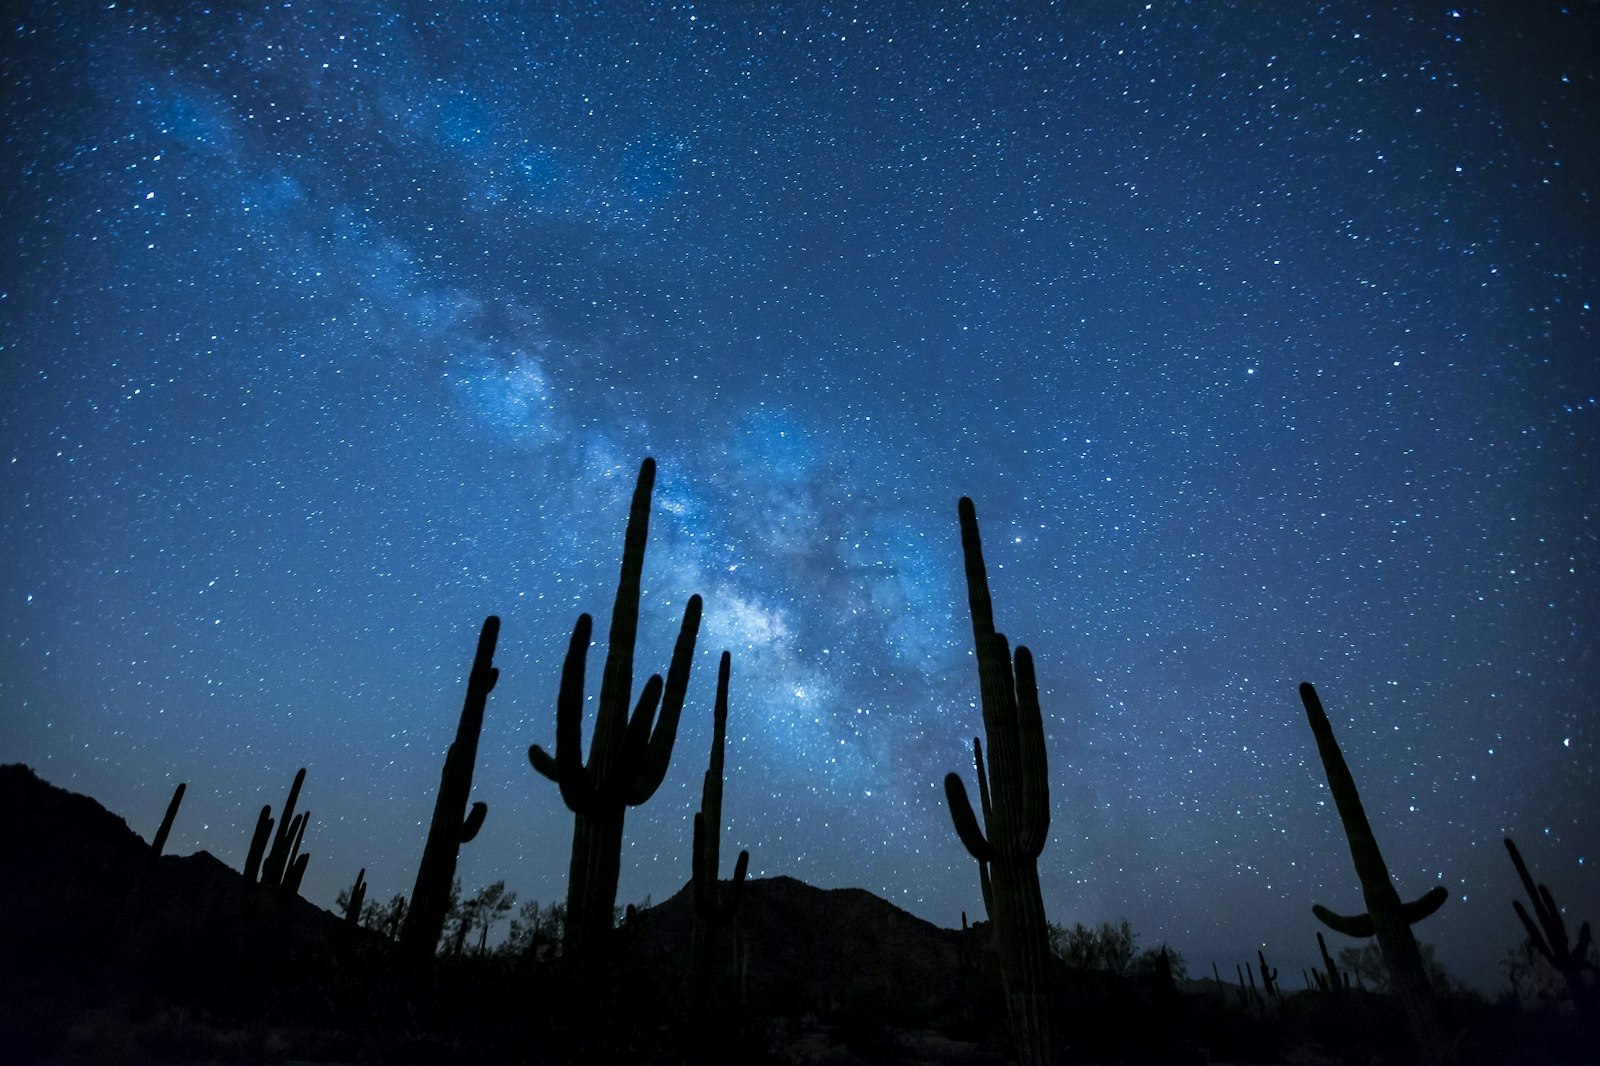 A night sky in the desert with the Milky Way visible